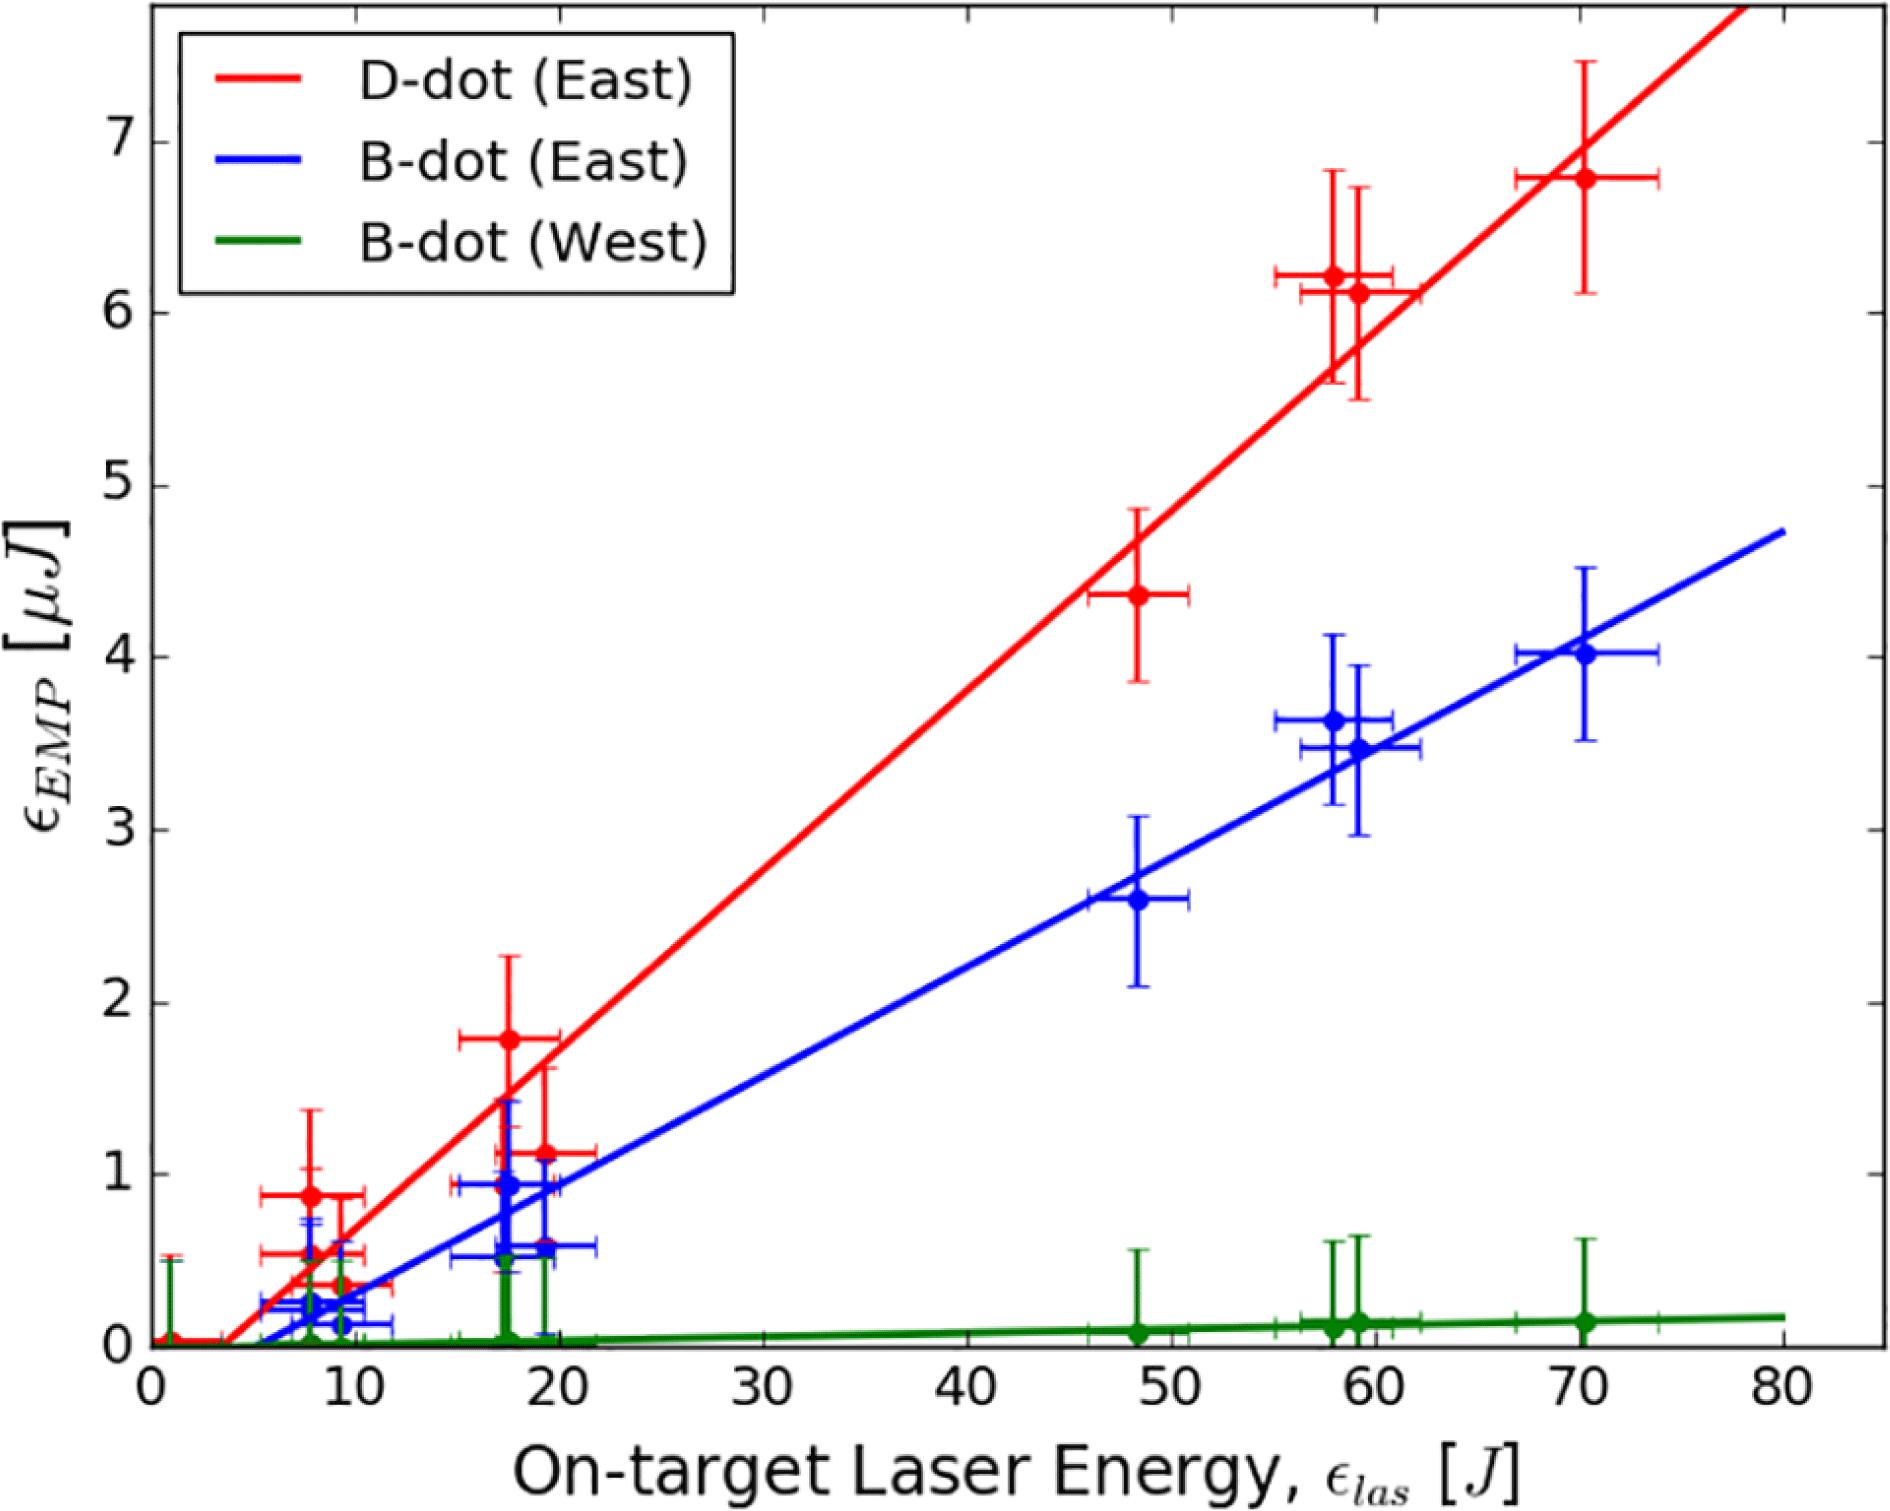 EMP energy versus on-target laser energy for the D-dot and two B-dot probes. The coloured lines represent linear fits for all three probes.